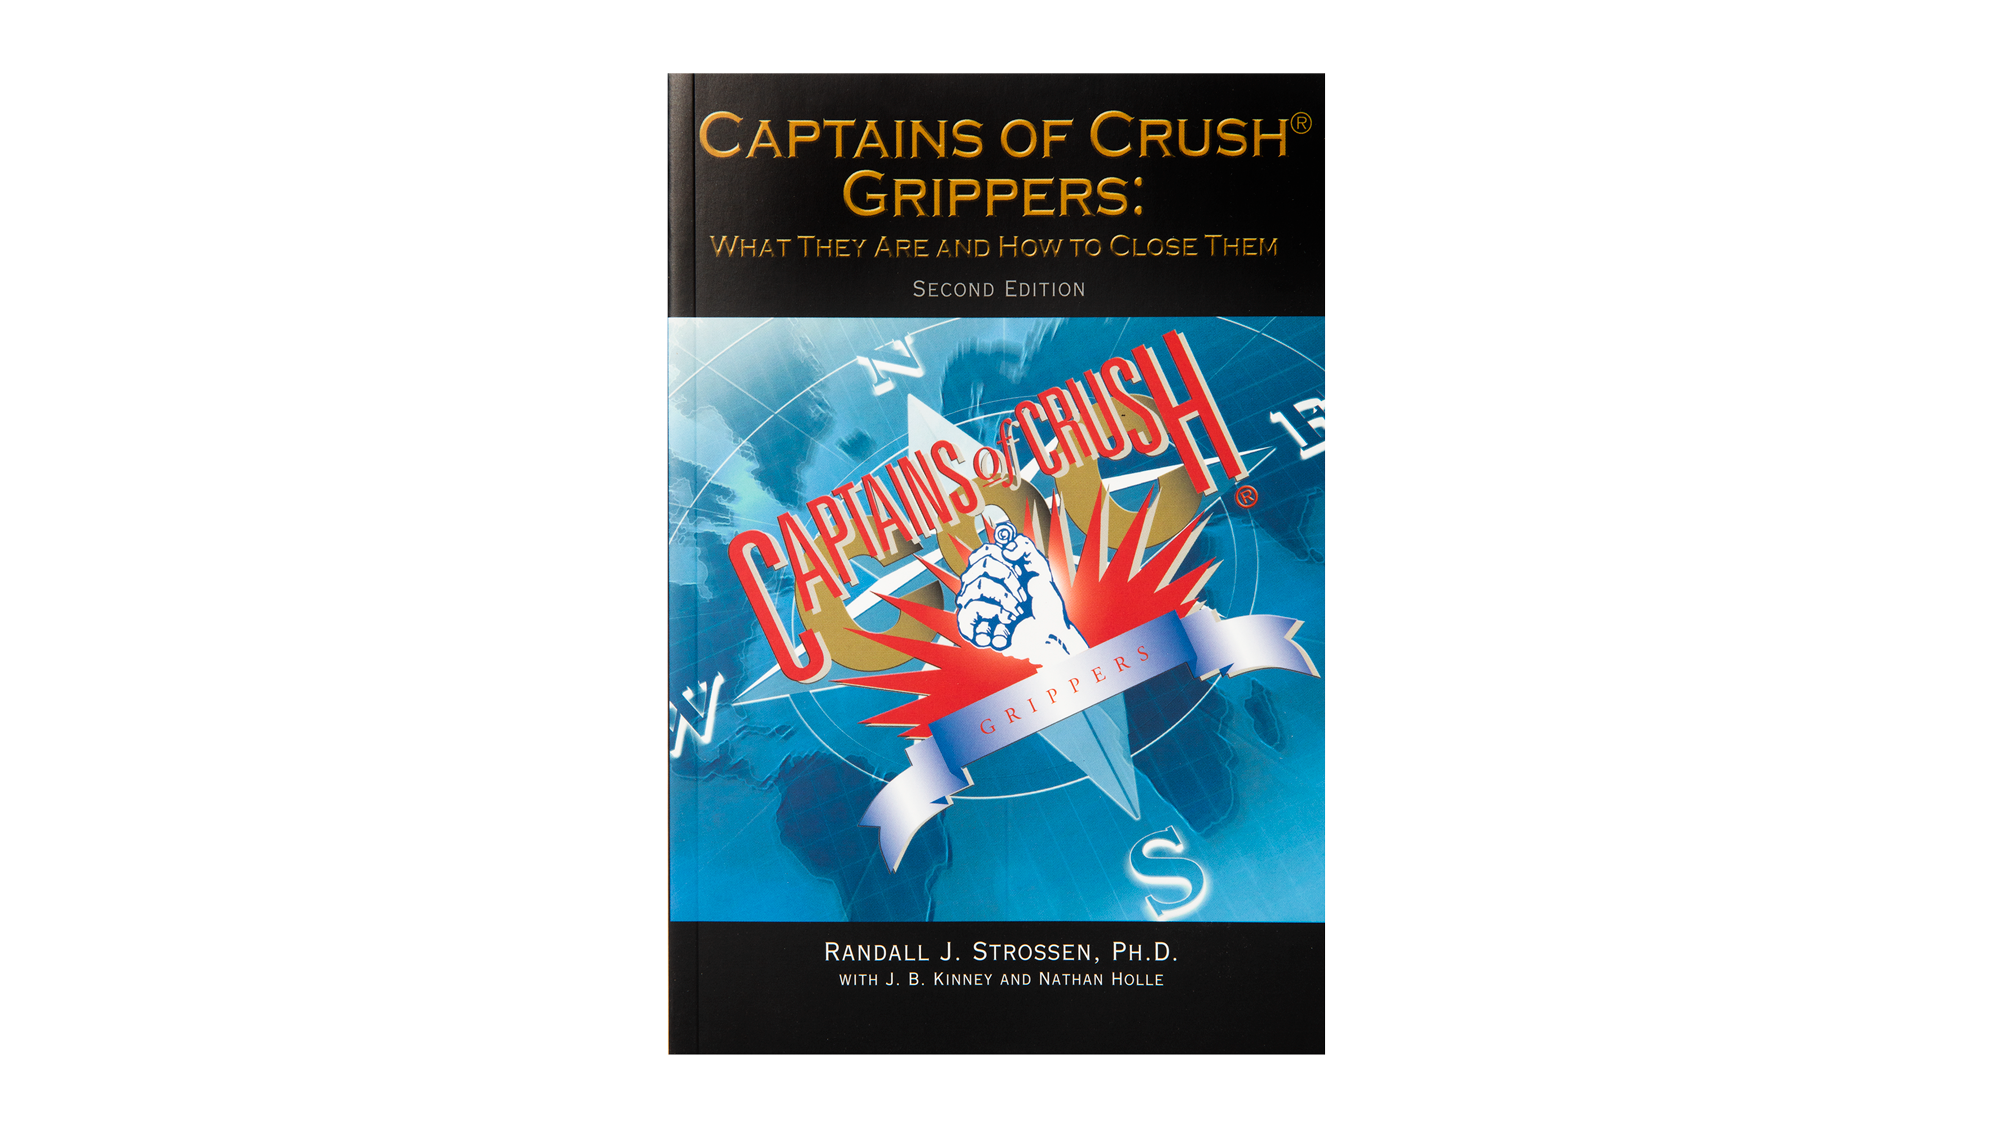 Captains of Crush Grippers - 2nd Edition